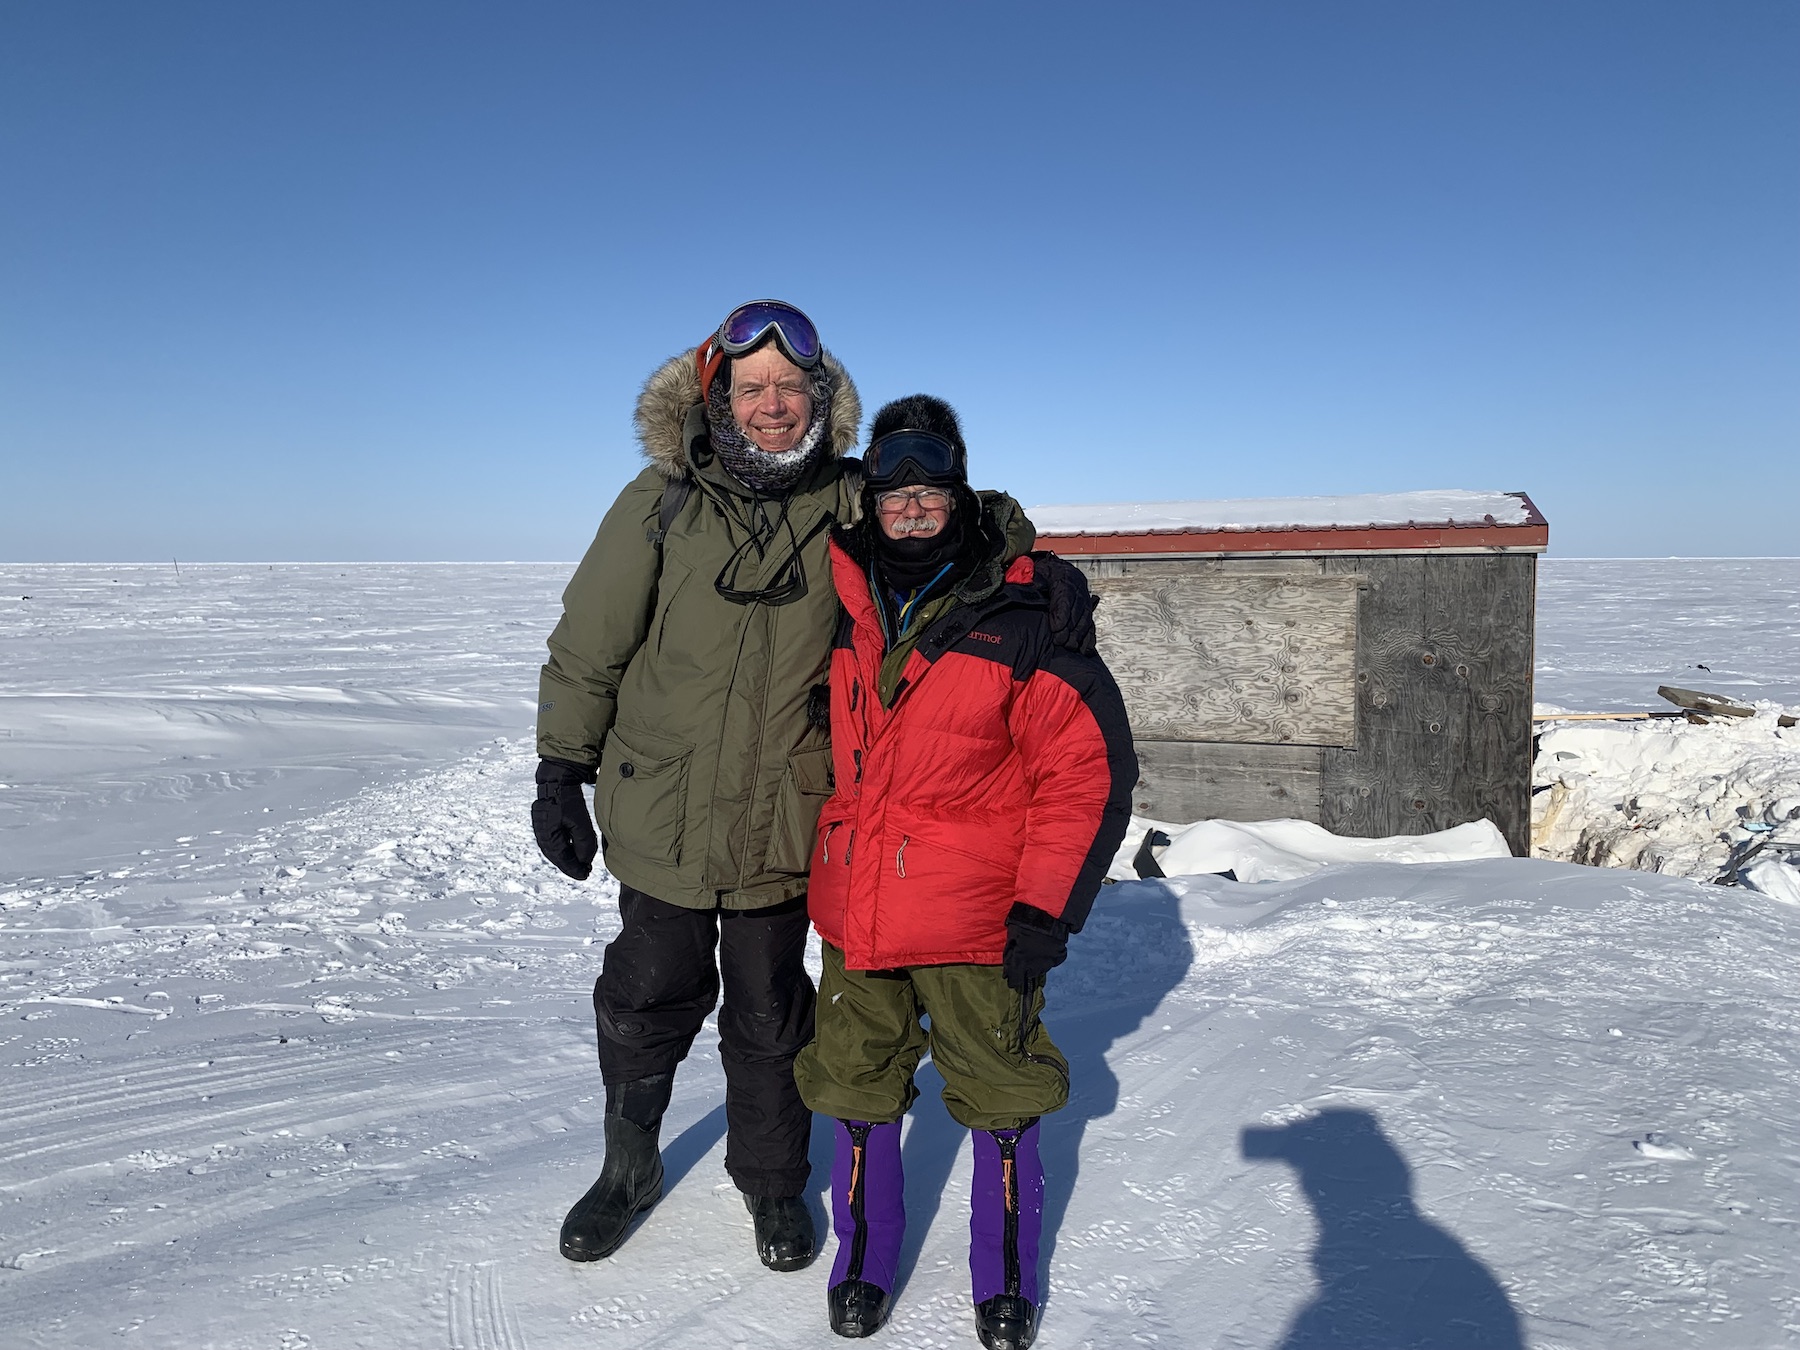 In bright sun, two men in winter gear pose in front of a plywood structure in a wide plain of snow stretching out across sea ice to the horizon.